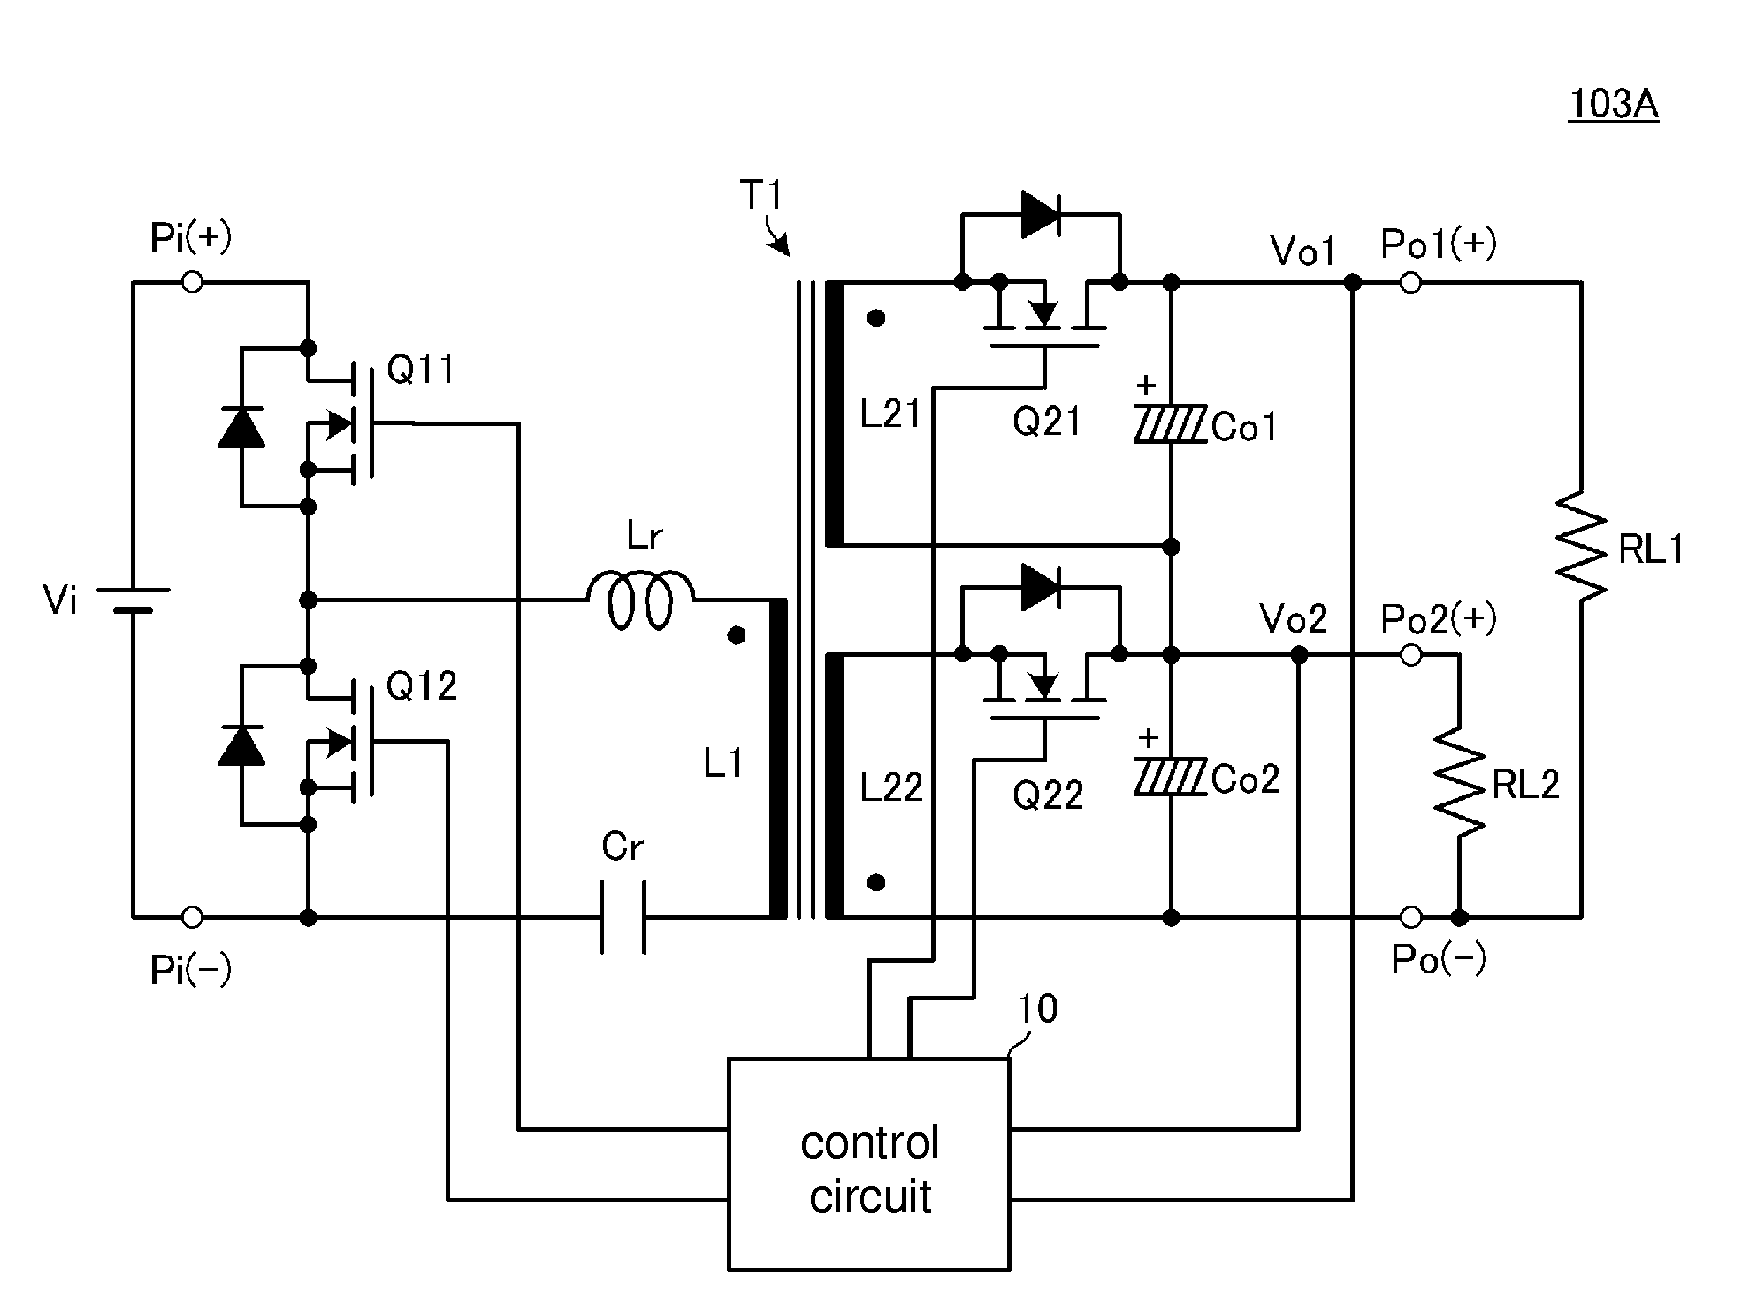 Switching power supply apparatus including a plurality of outputs